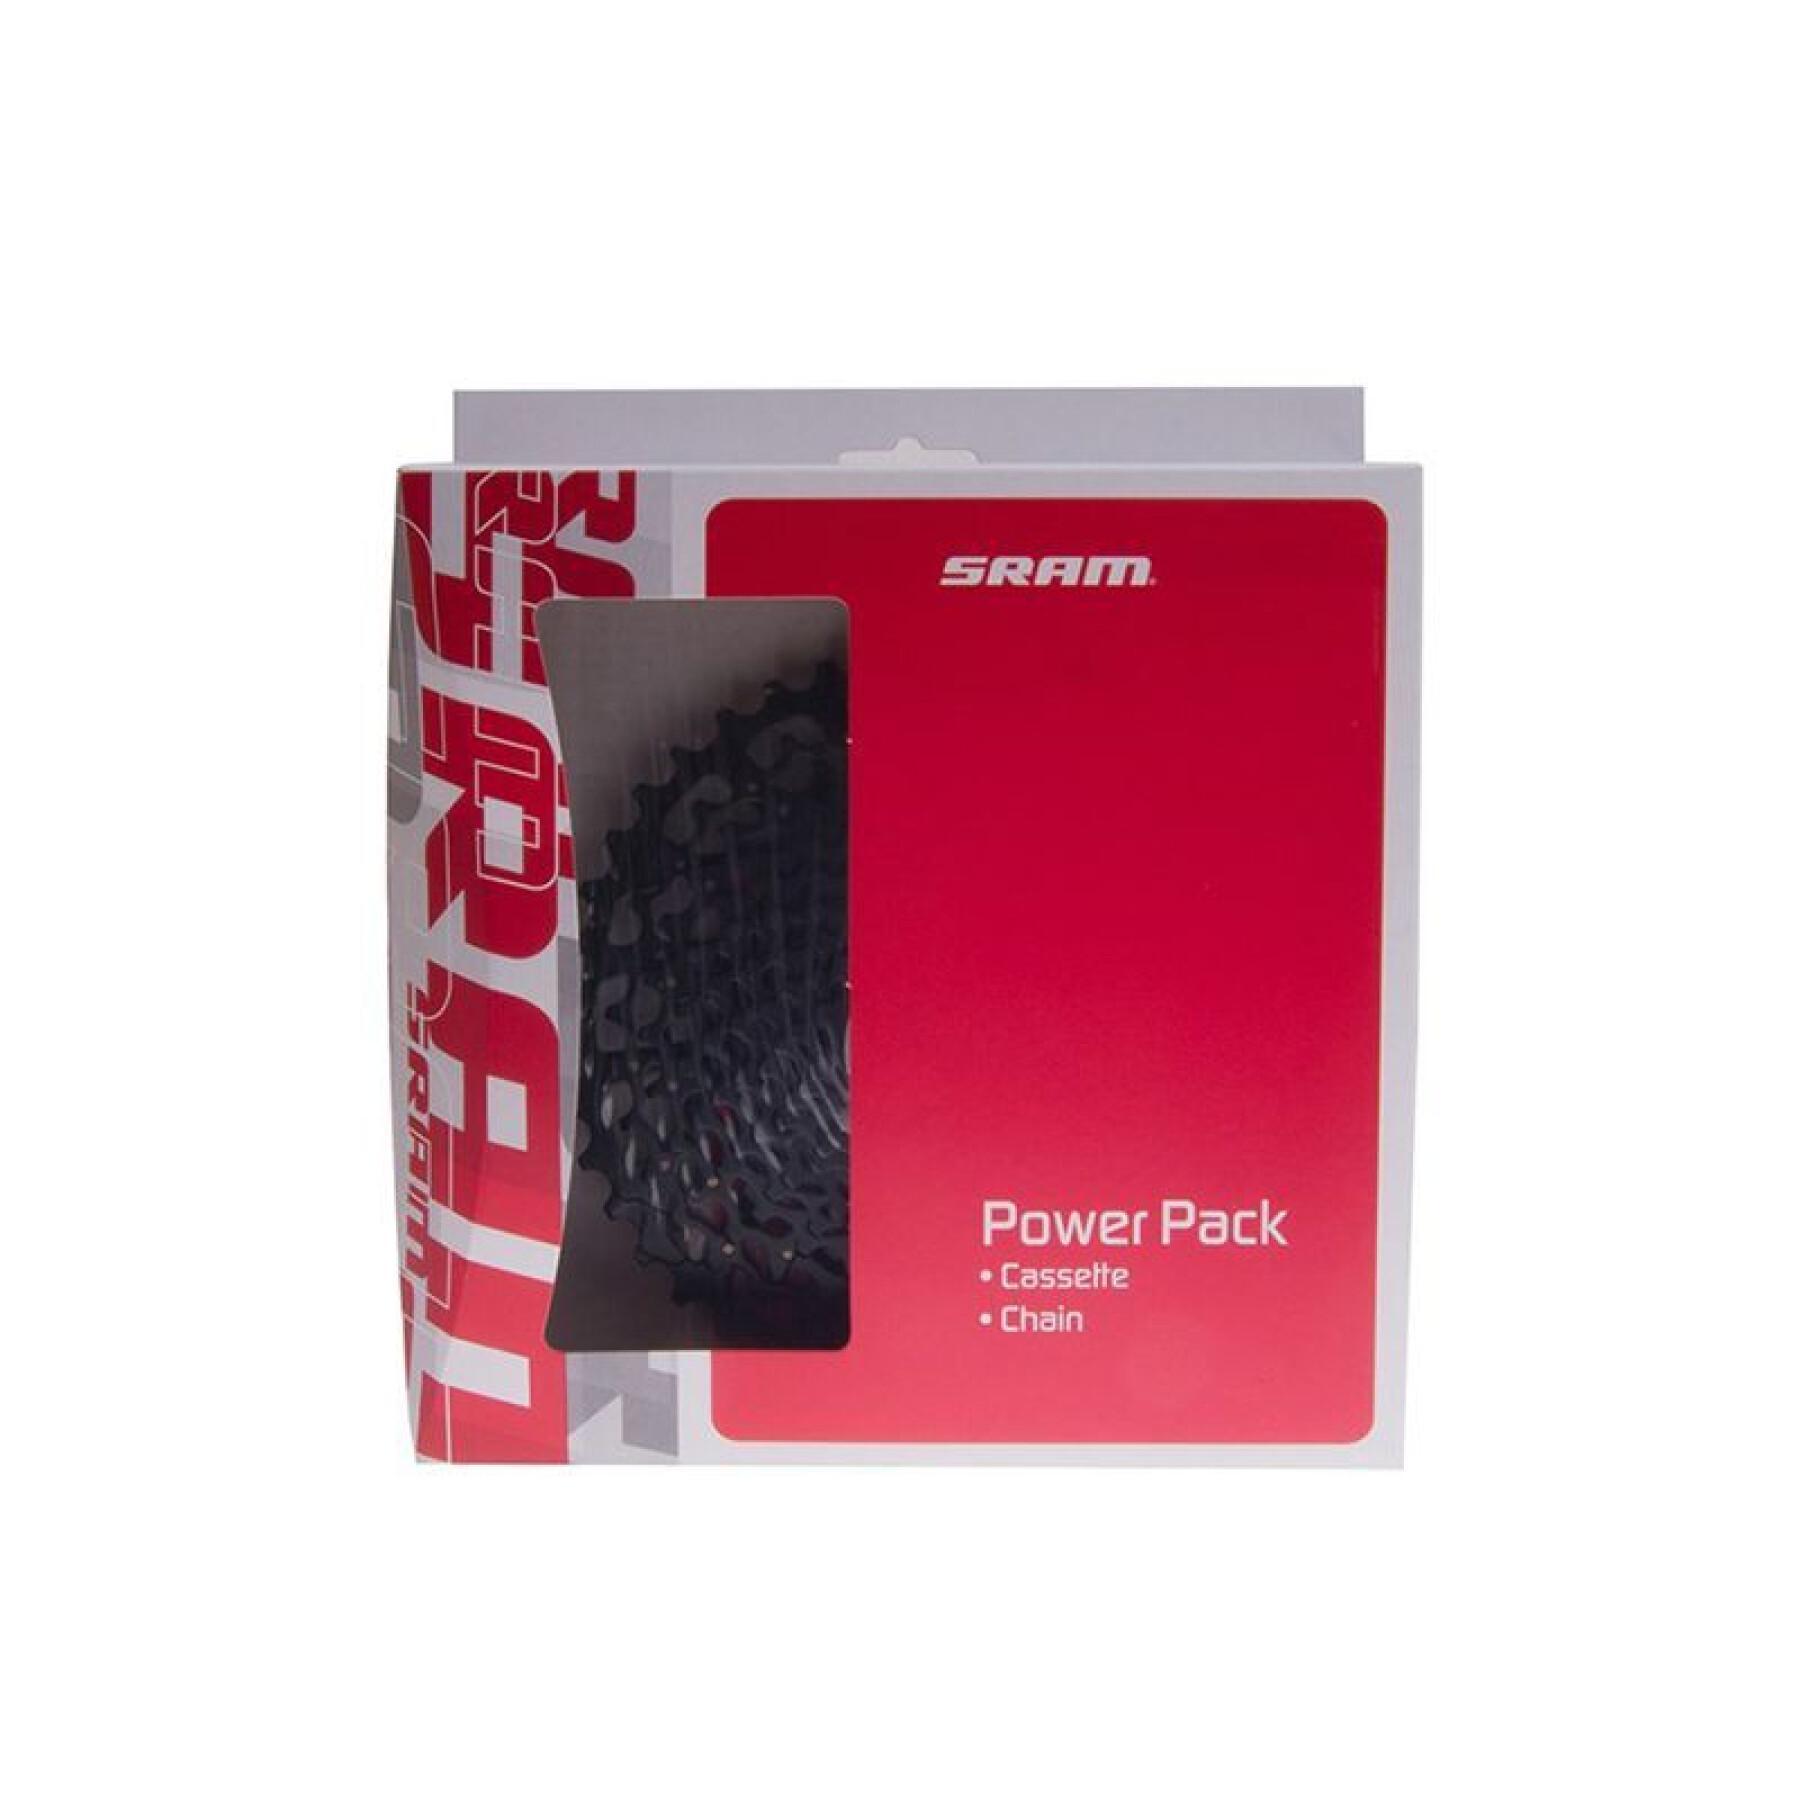 Cassette bicycle chain Sram Power Pack Pc-1010